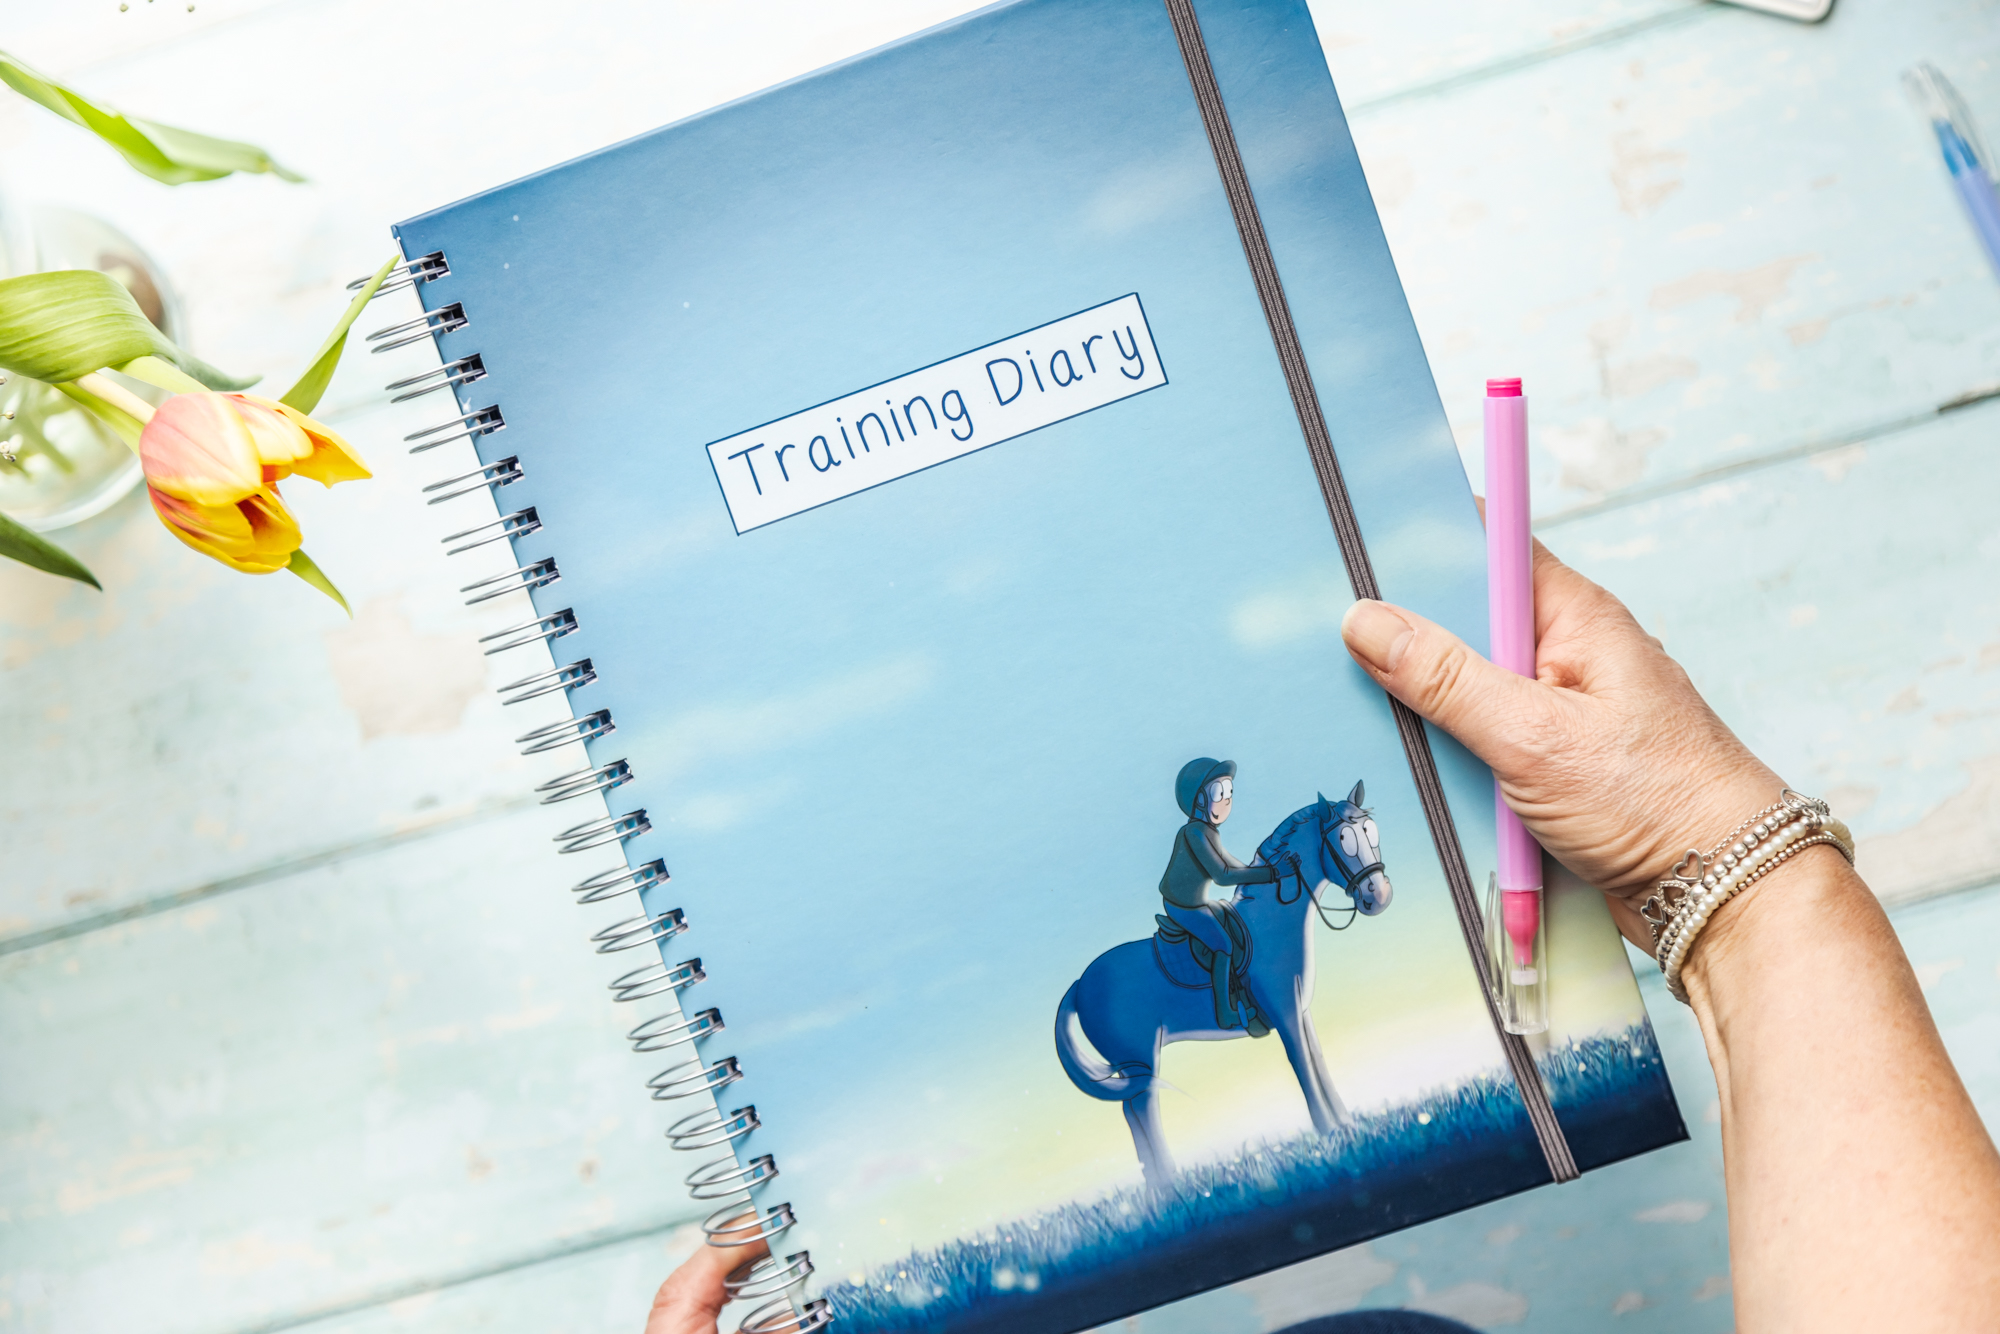 Training diary by Emily Cole being held in a hand